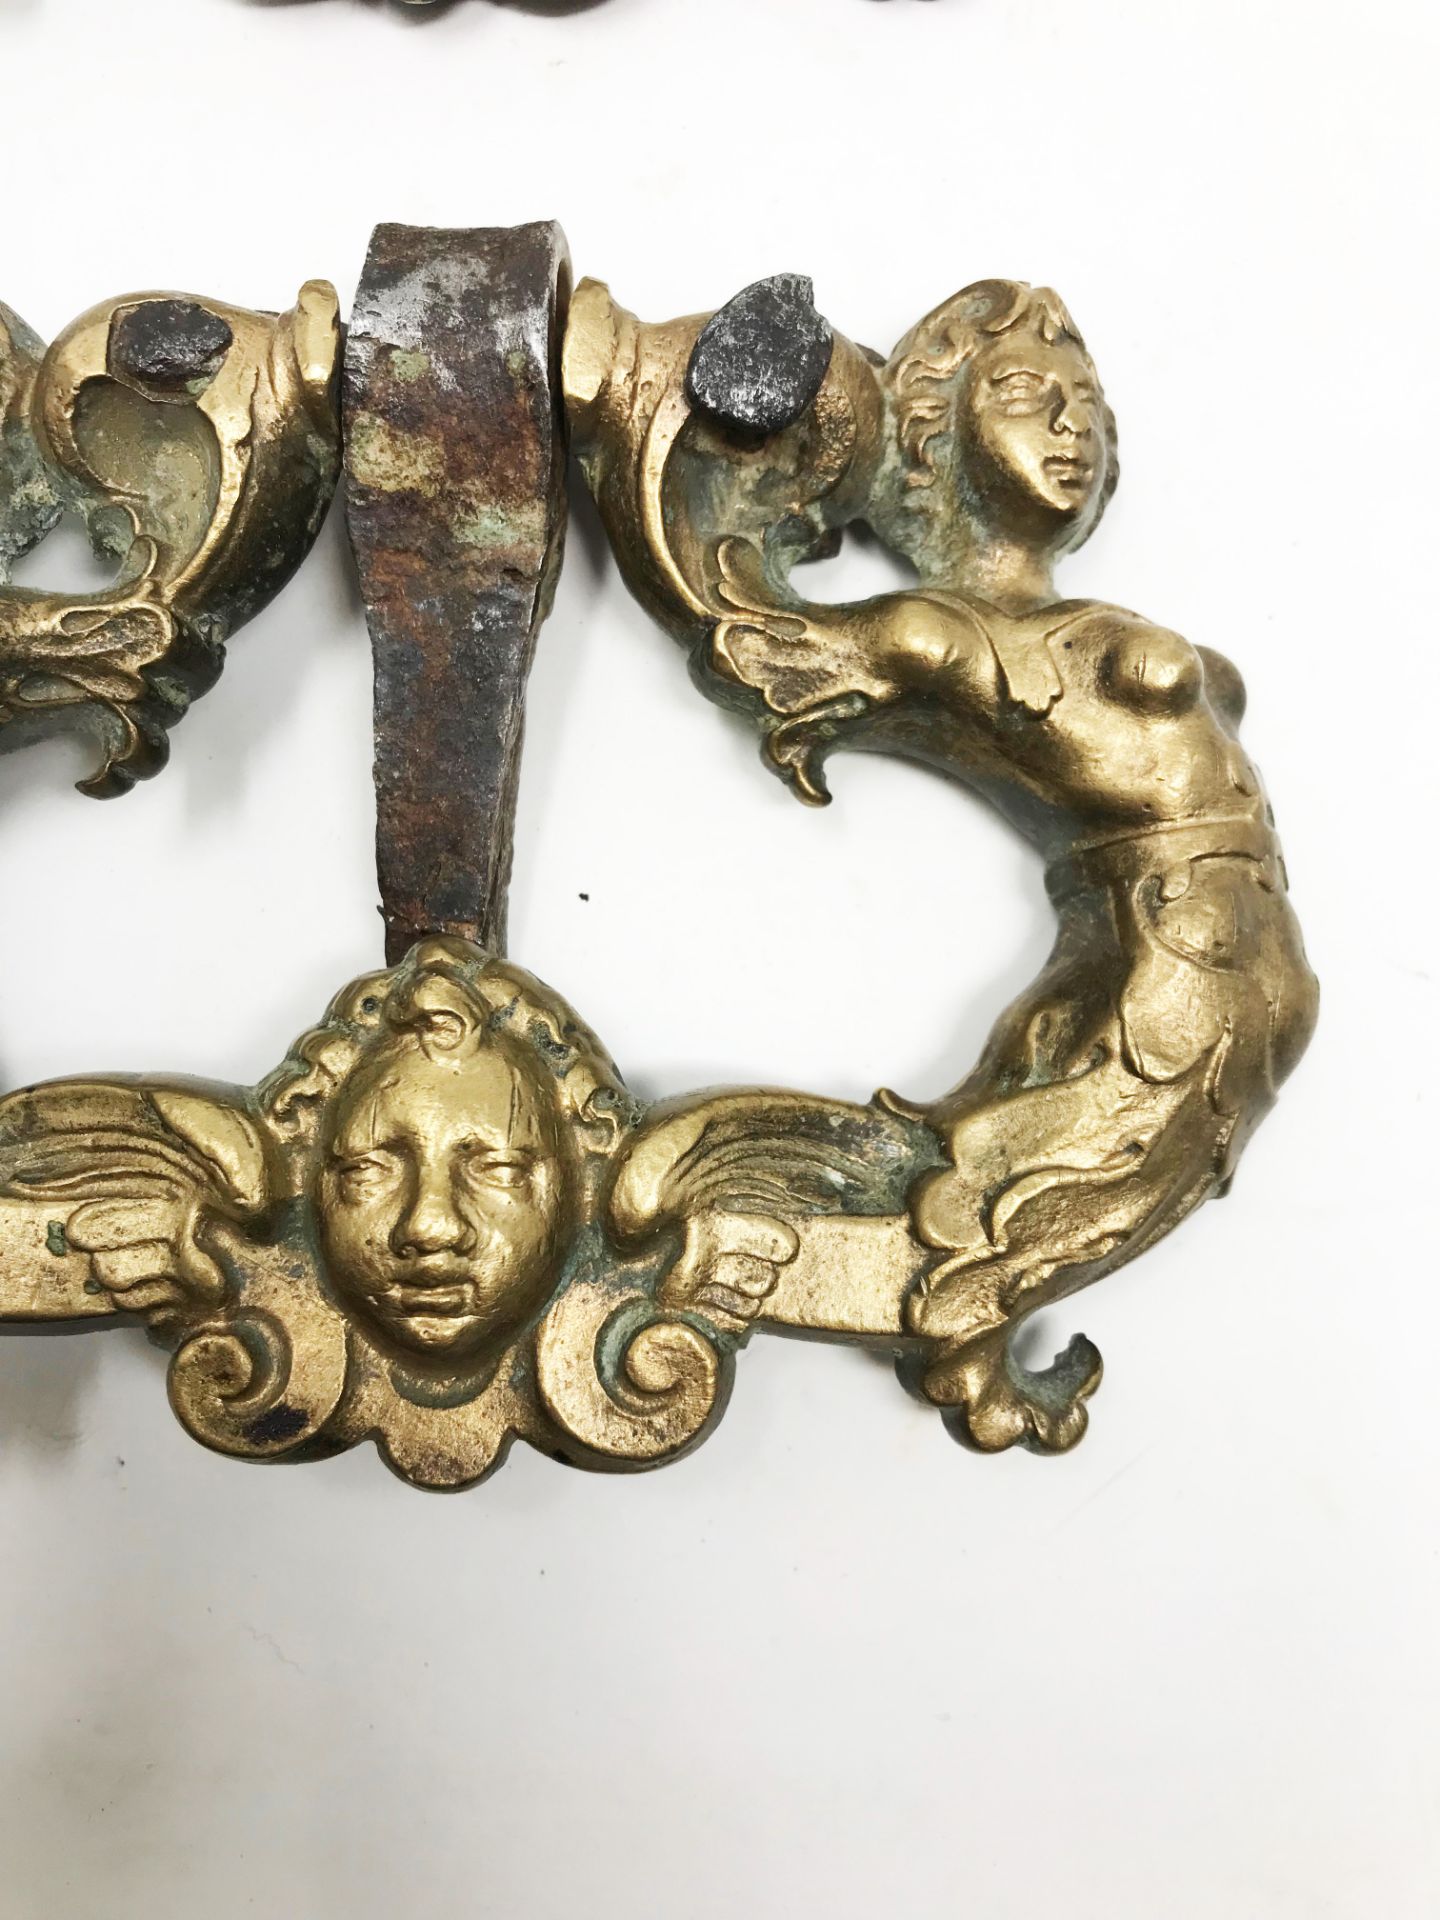 A pair of bronze handles with two mermaids and a mascaron. 9, 11 x 12, 54 cm. Part of the chapter "